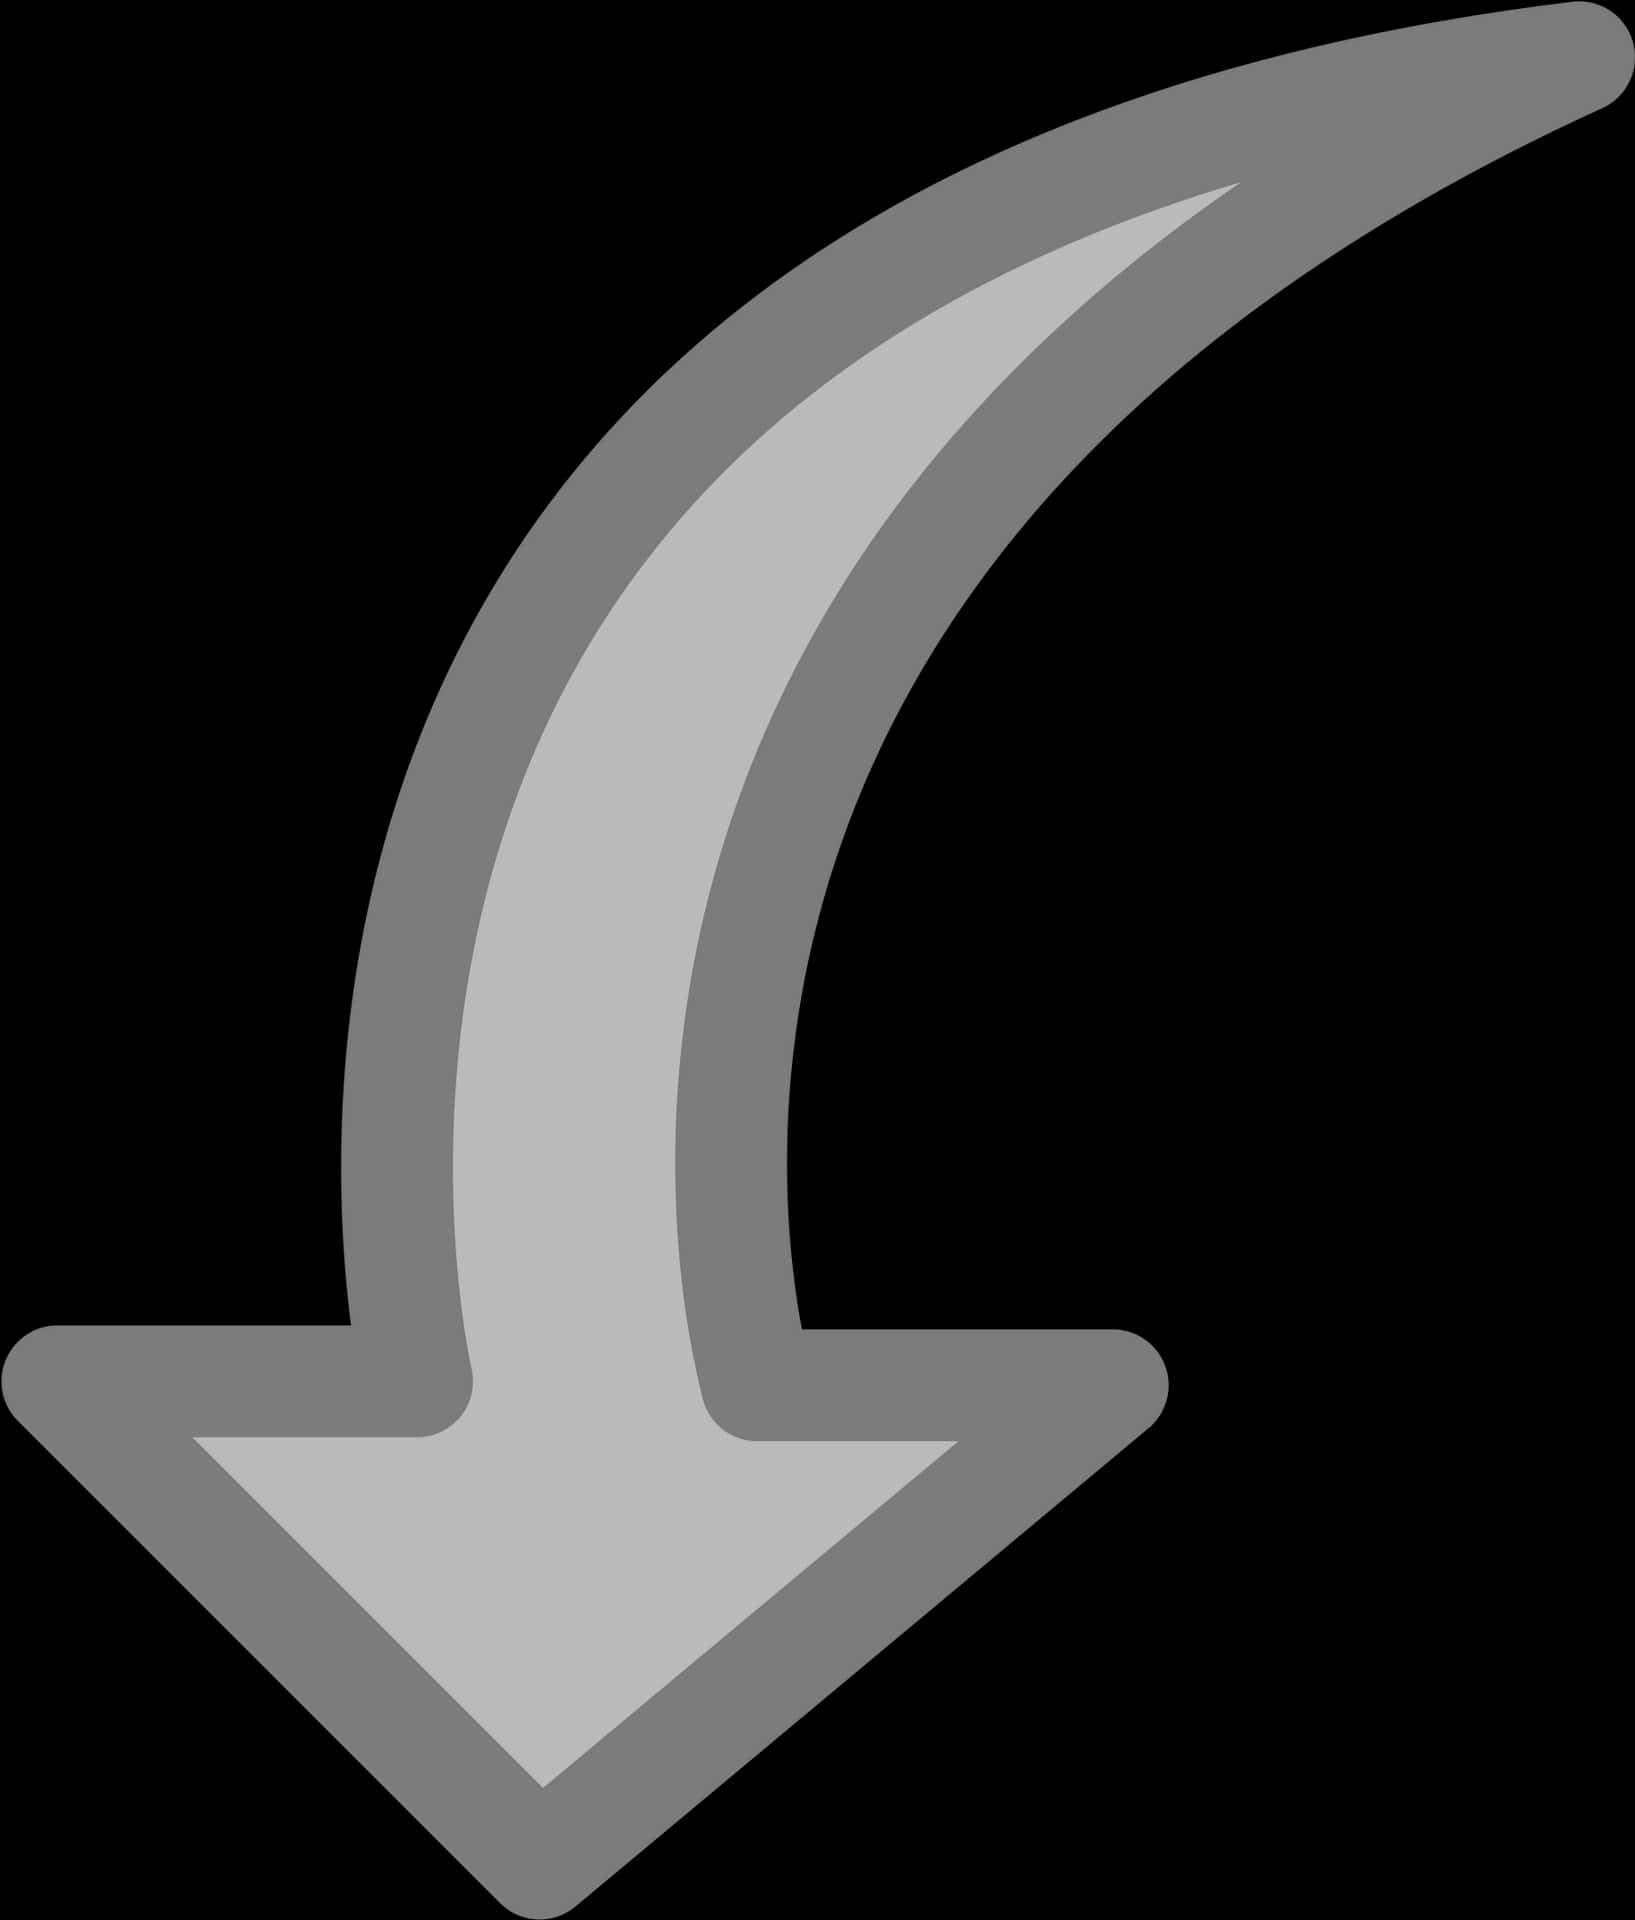 Curved Down Arrow Graphic PNG